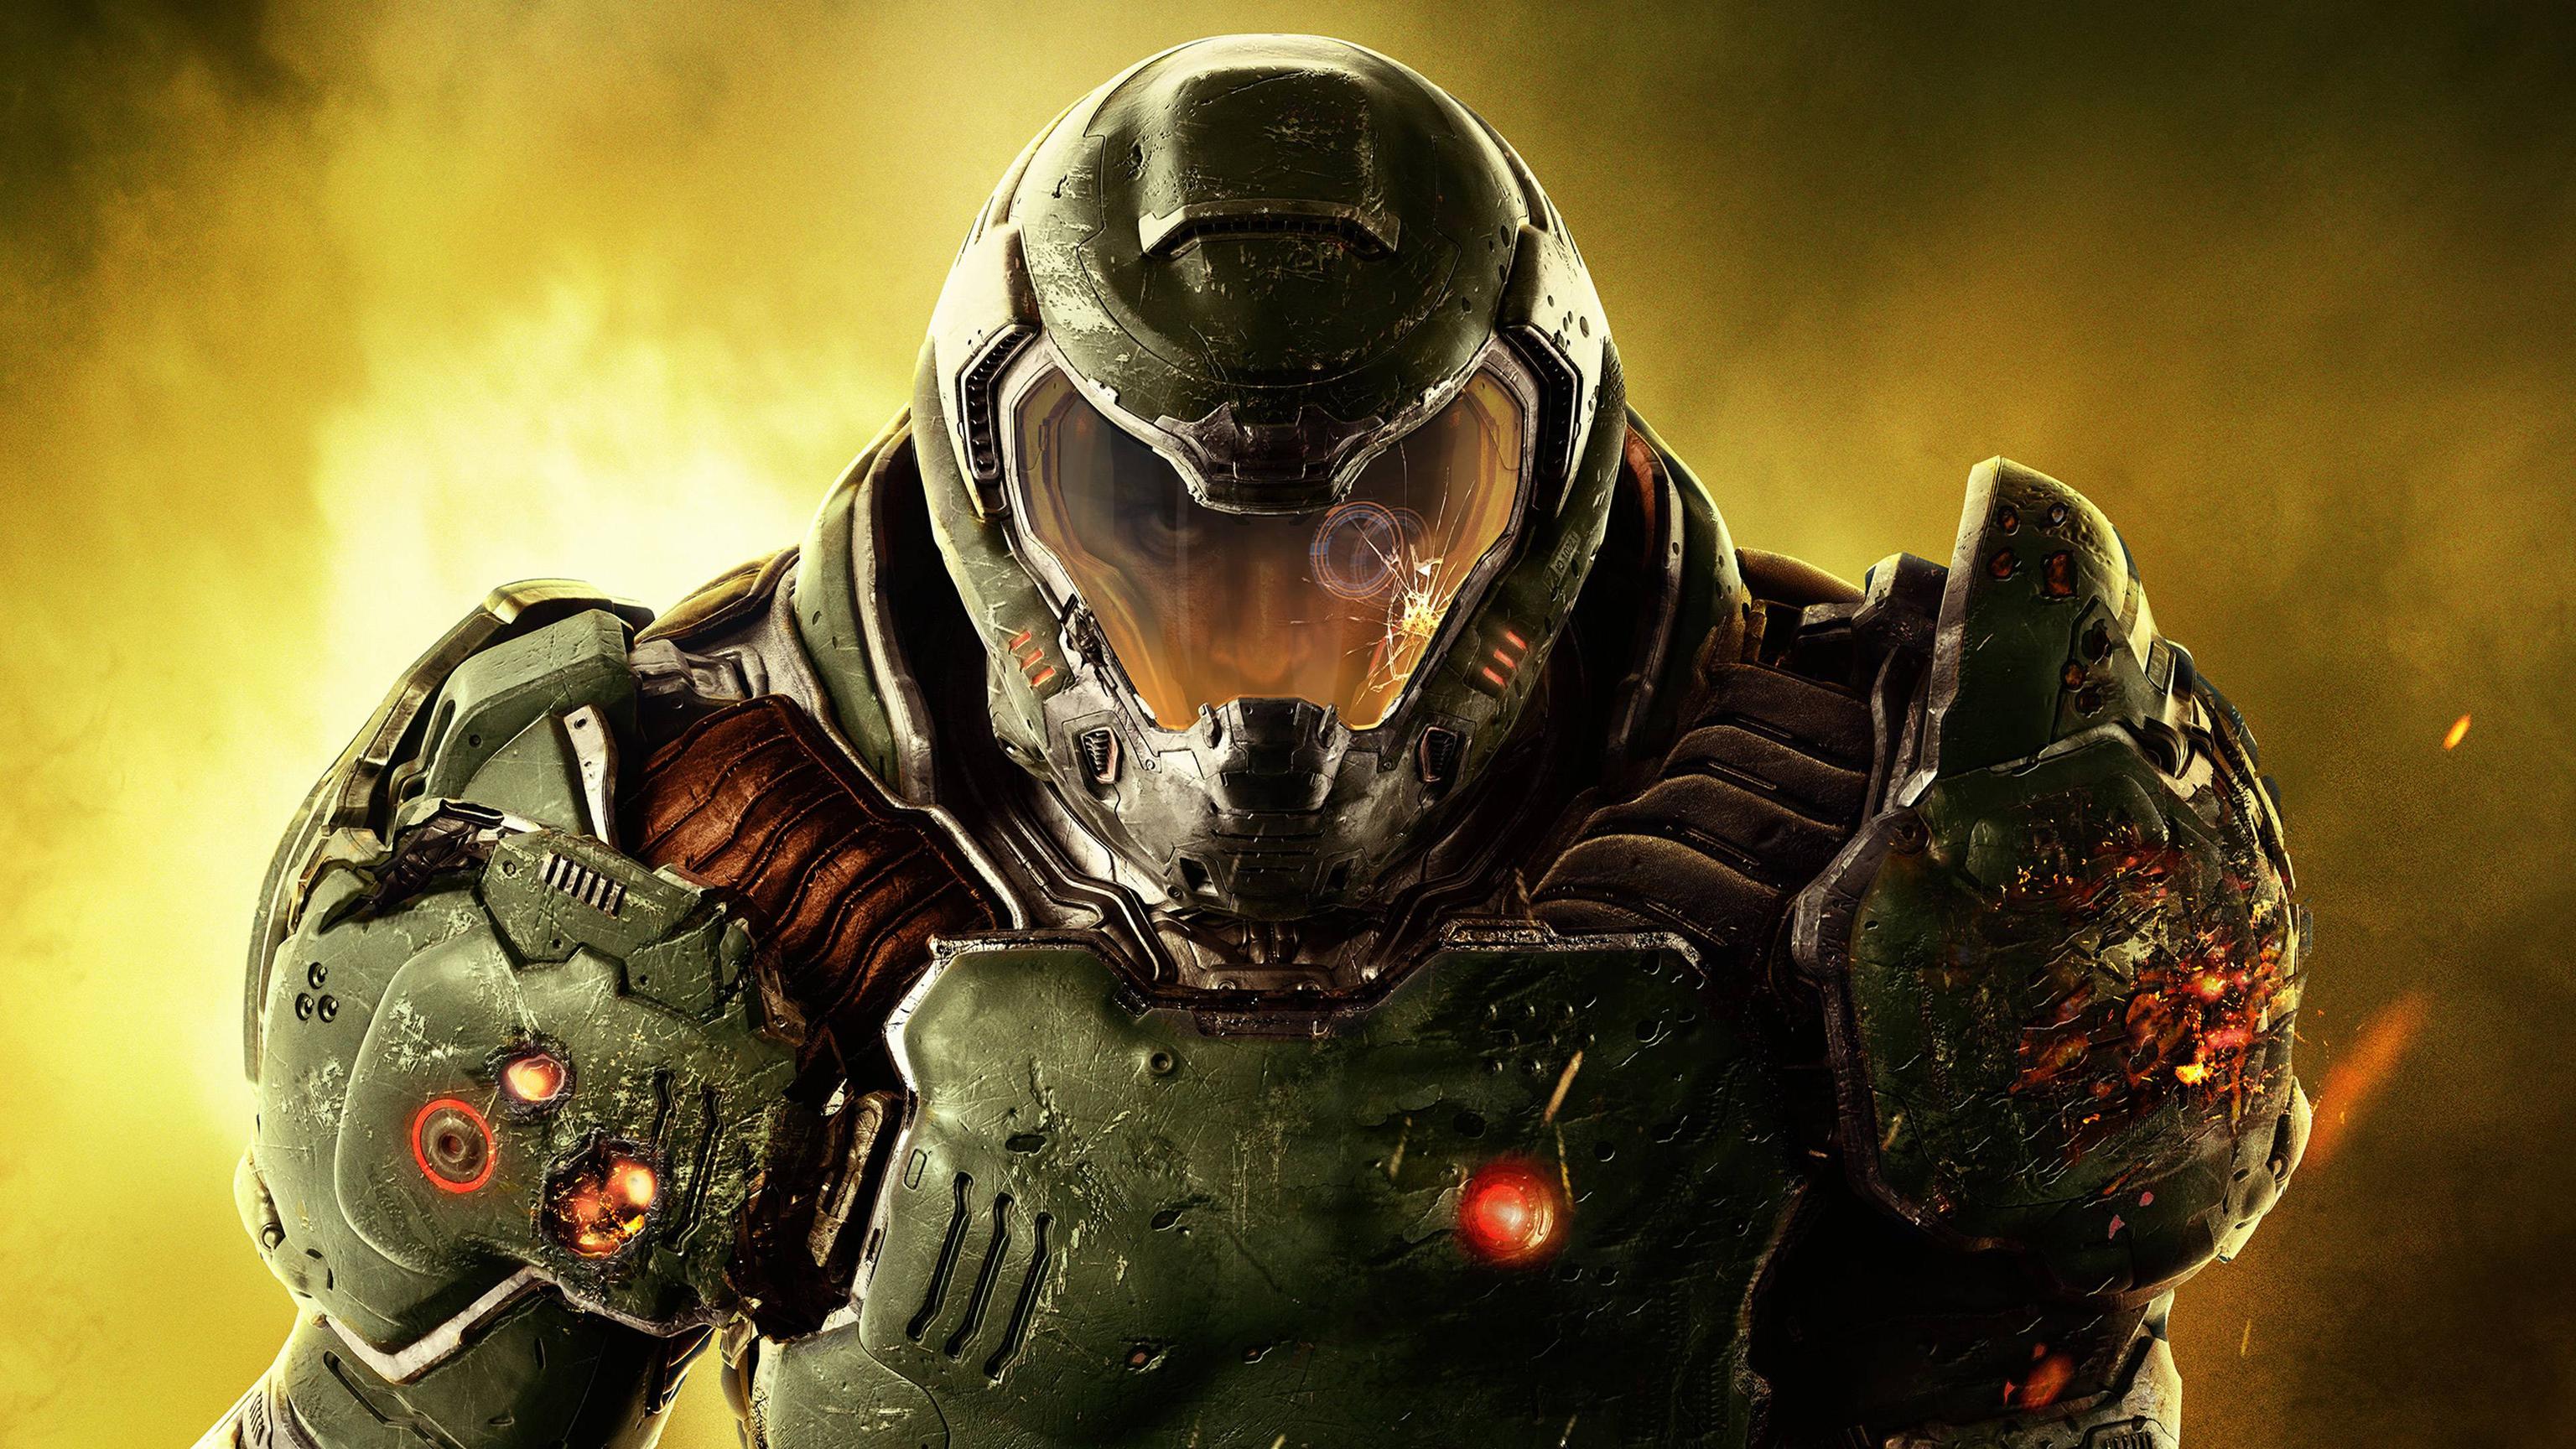 doom wallpaper,action adventure game,pc game,games,movie,fictional character